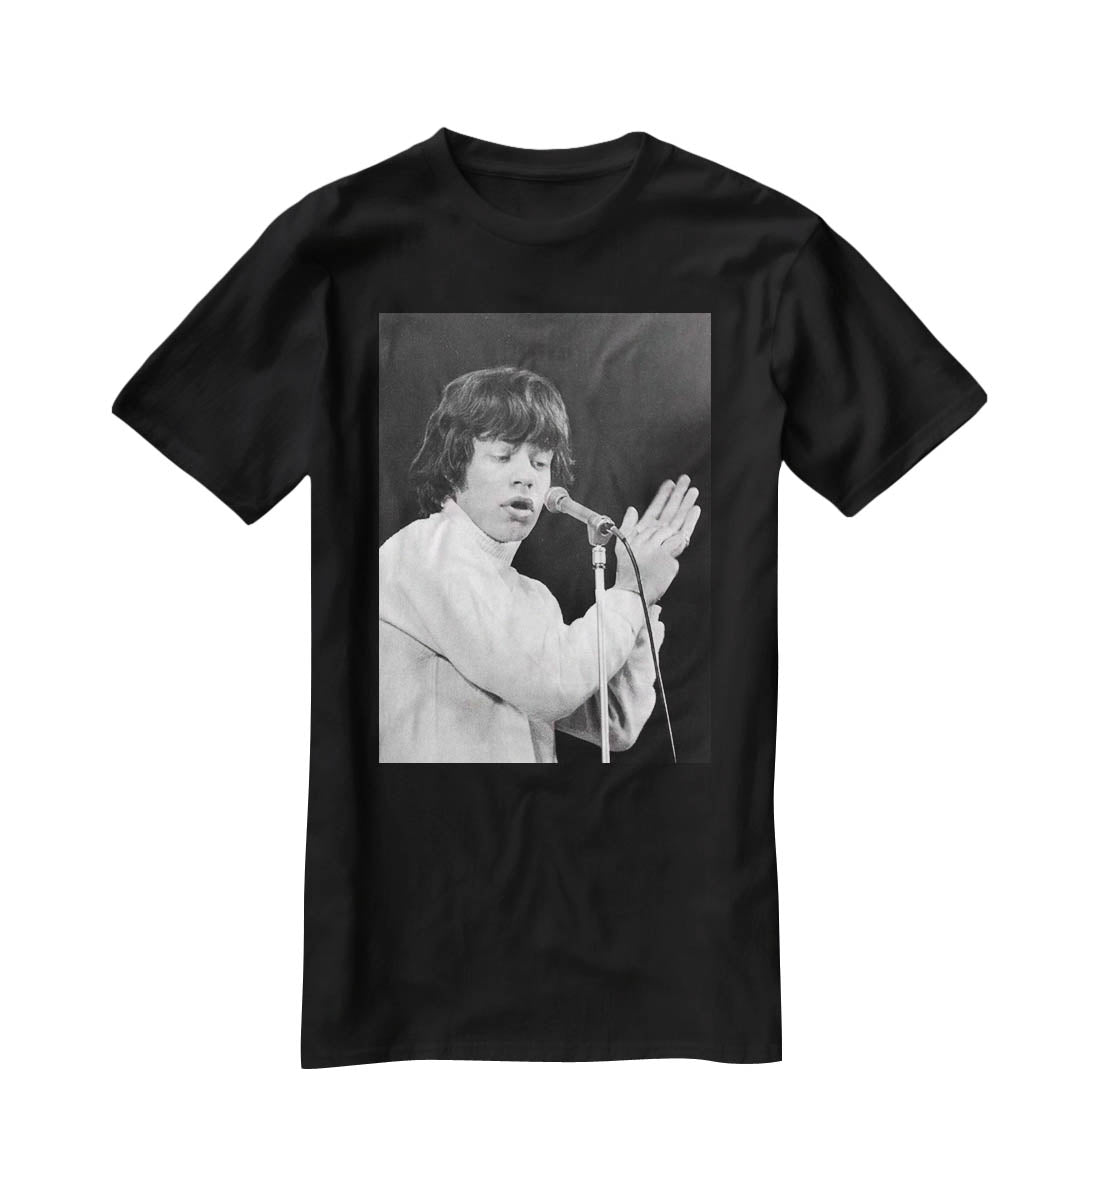 Mick Jagger on stage in 1965 T-Shirt - Canvas Art Rocks - 1